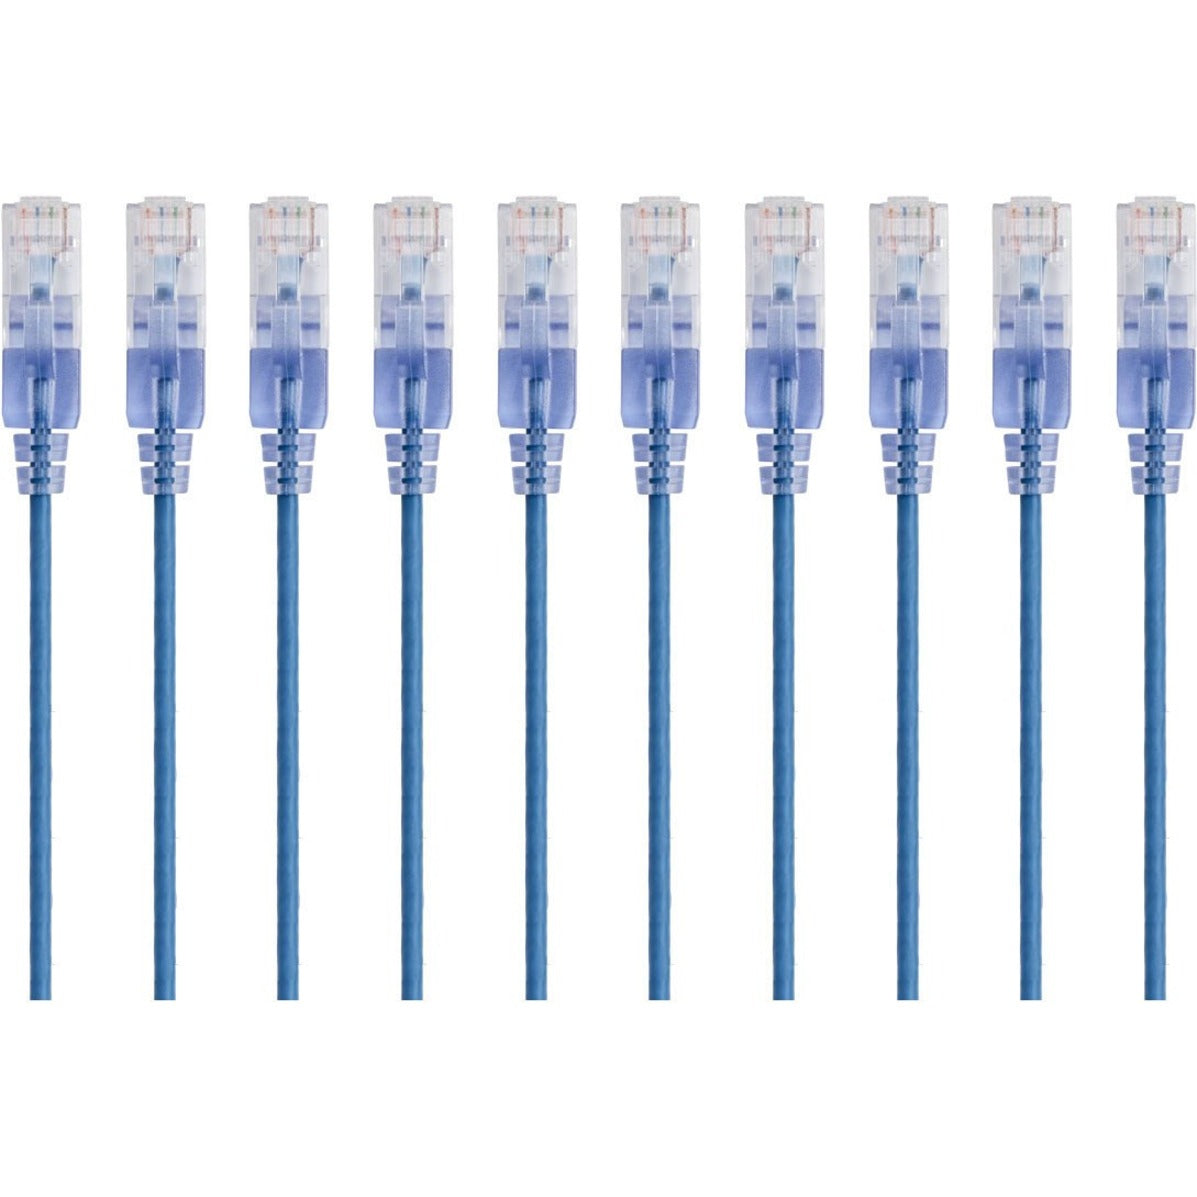 Monoprice 15170 SlimRun Cat6A Ethernet Network Patch Cable 14ft Blue, 10-Pack